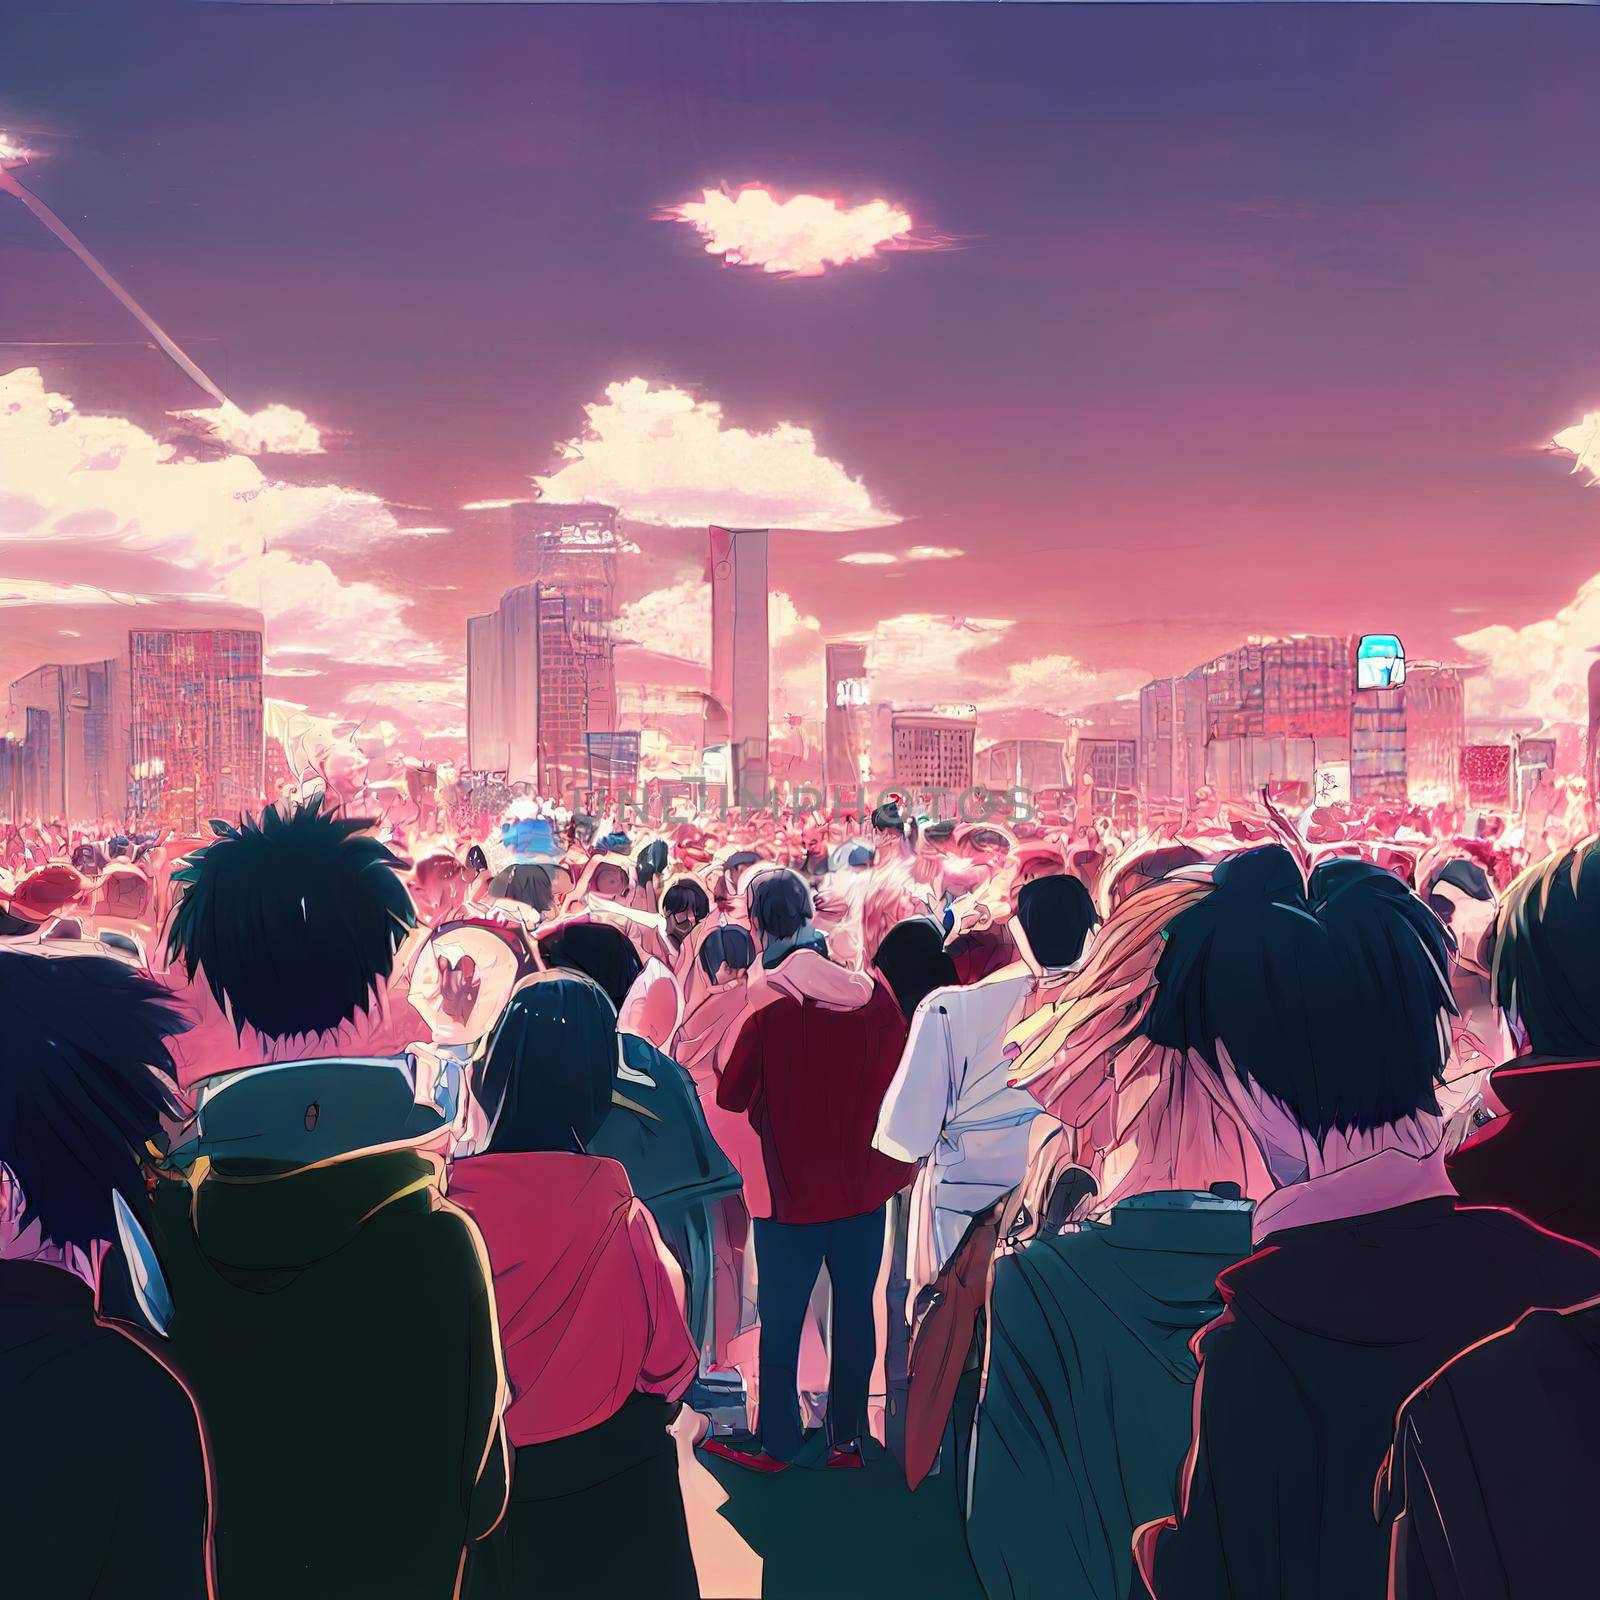 crowds in pink city anime style by 2ragon